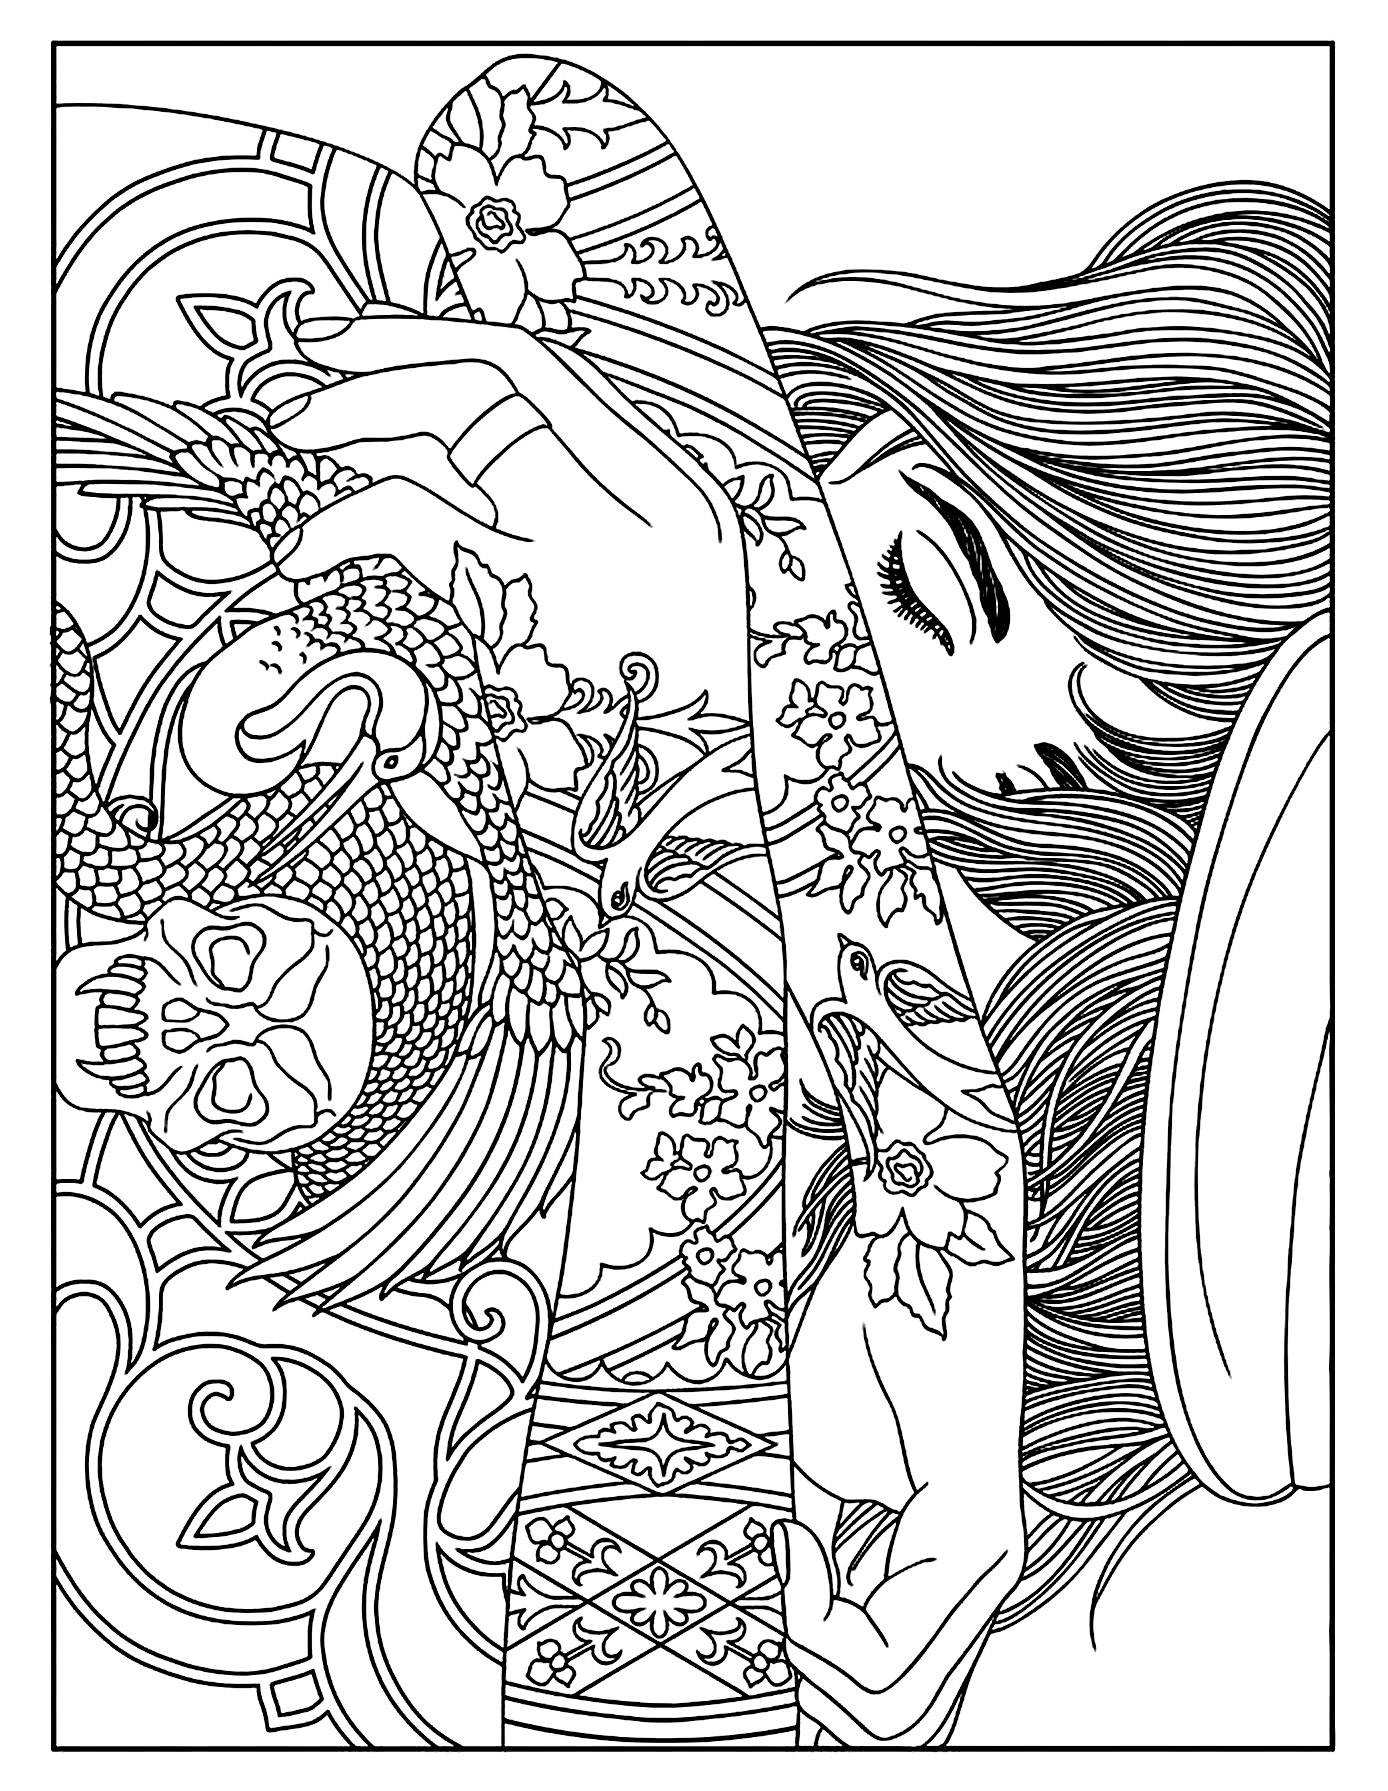 Woman tattoos - Tattoos Adult Coloring Pages